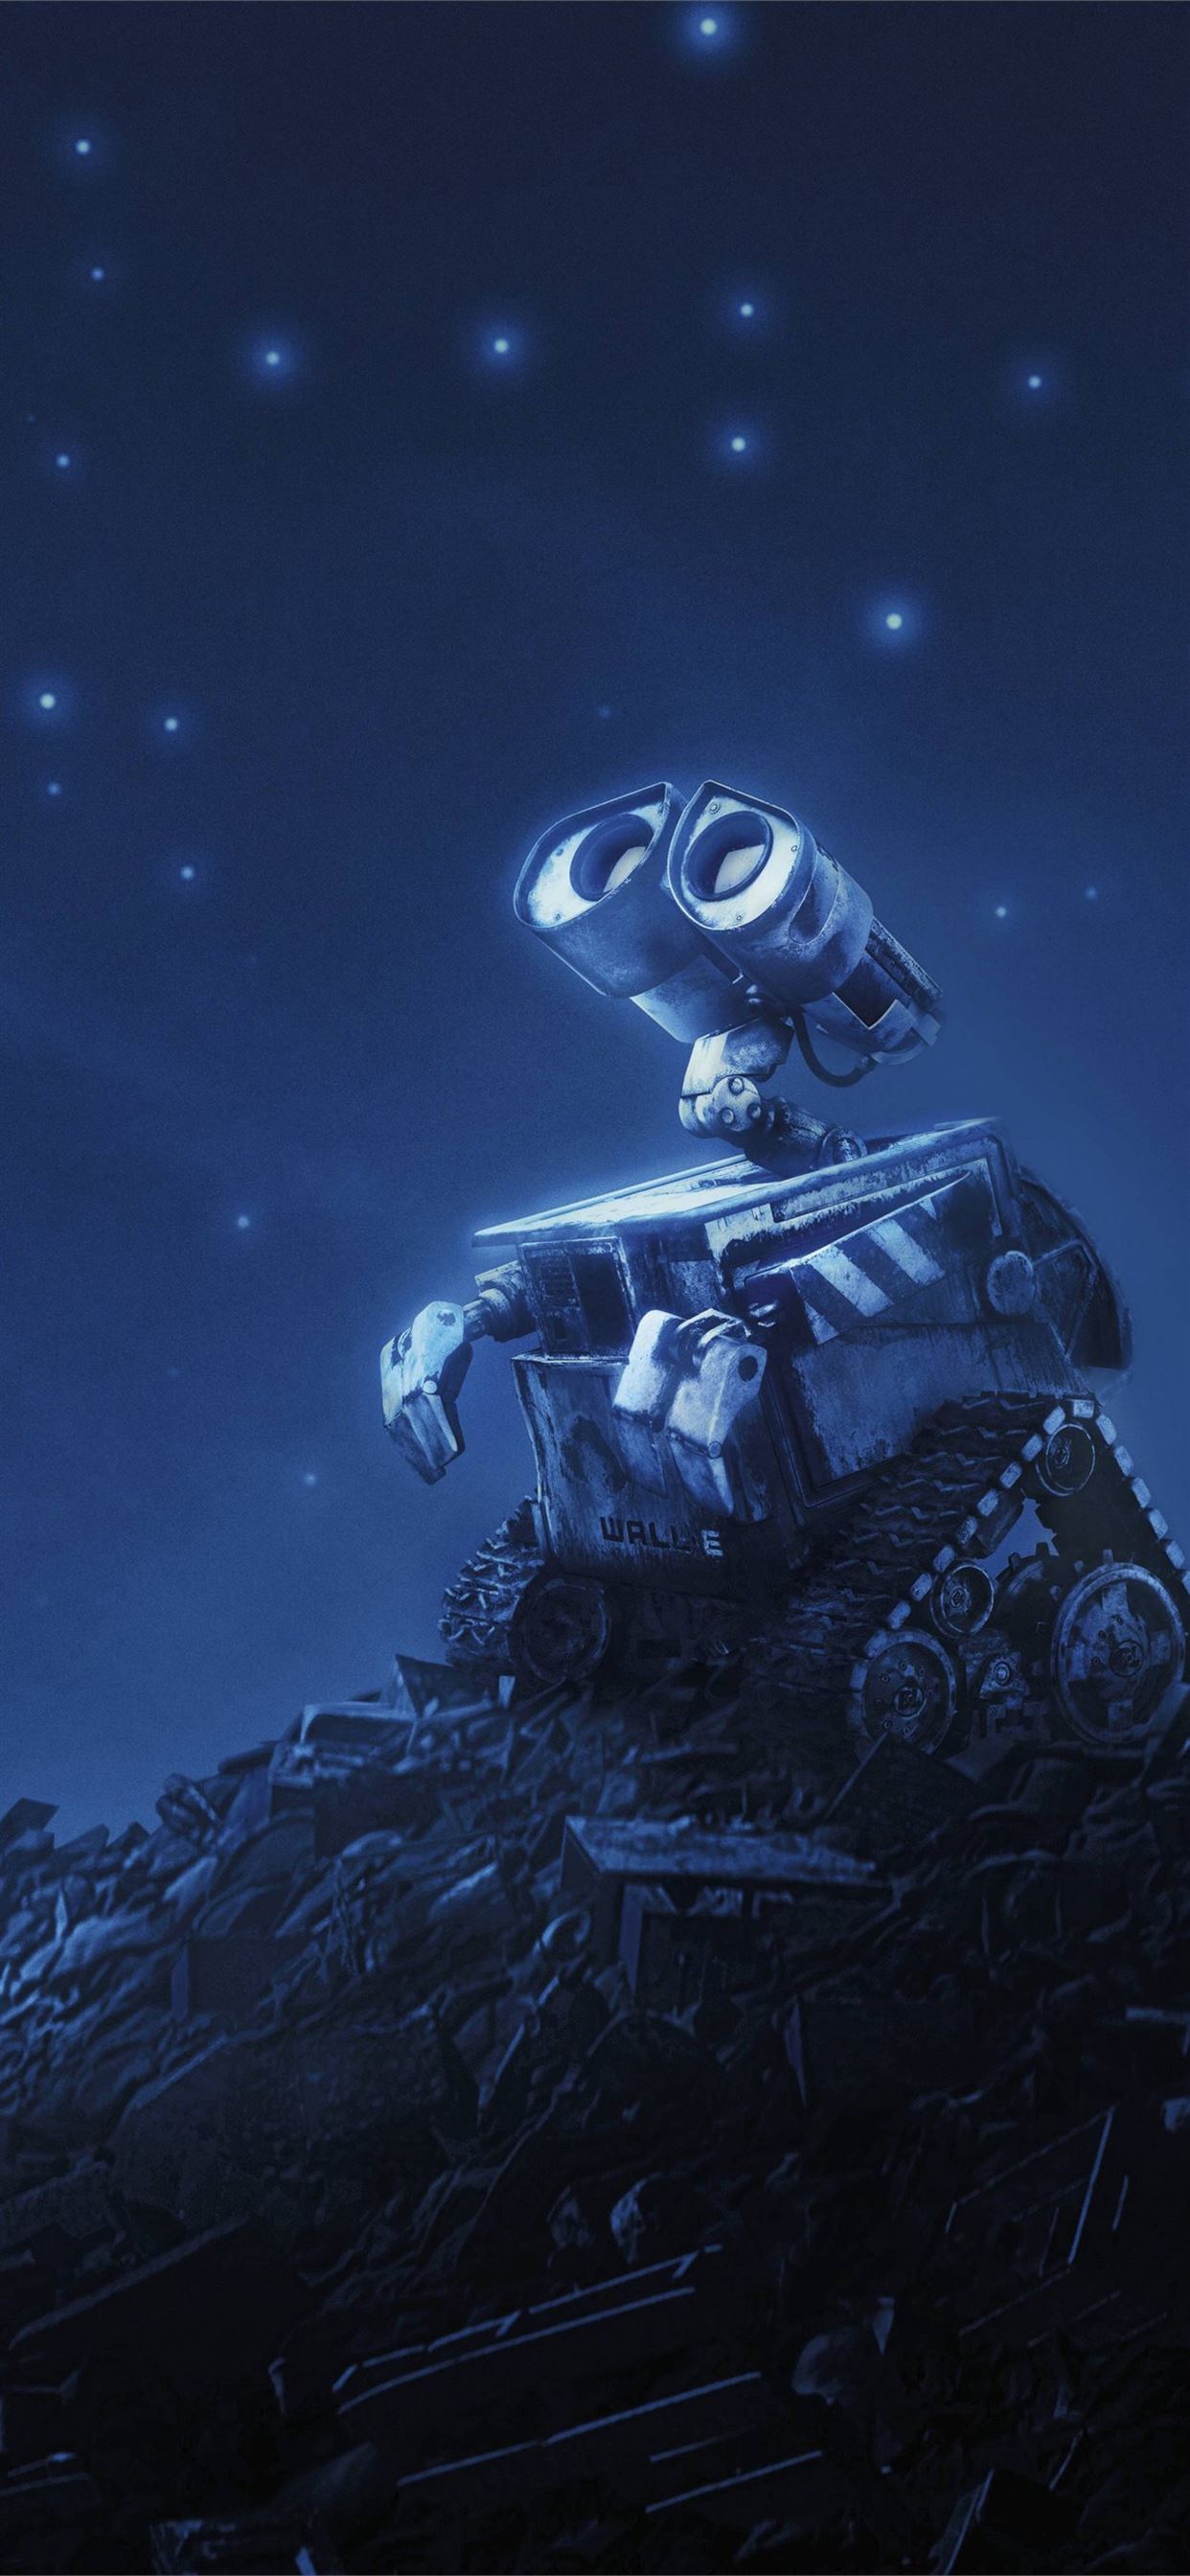 Wall E 2020 4k Samsung Galaxy Note 9 8 S9 S8 S8 QH... iPhone Wallpapers  Free Download